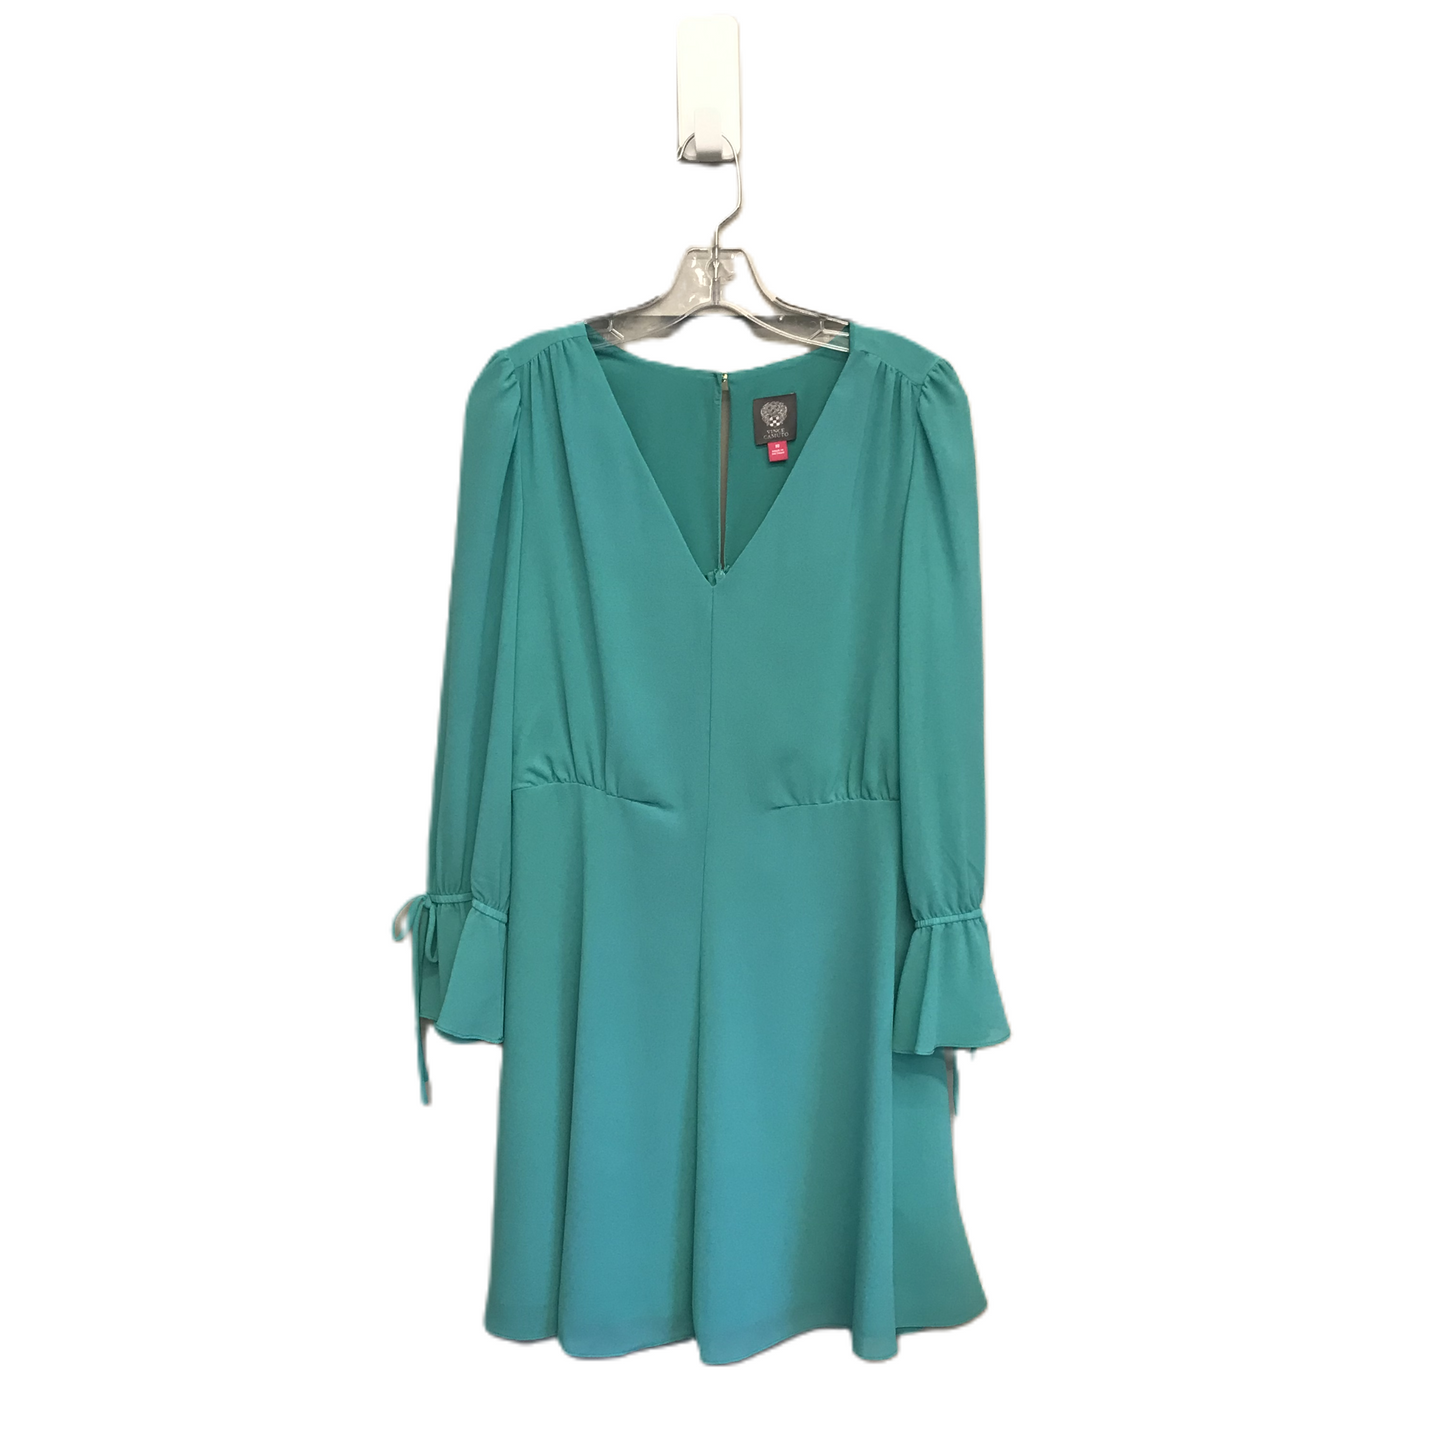 Green Dress Casual Short By Vince Camuto, Size: M